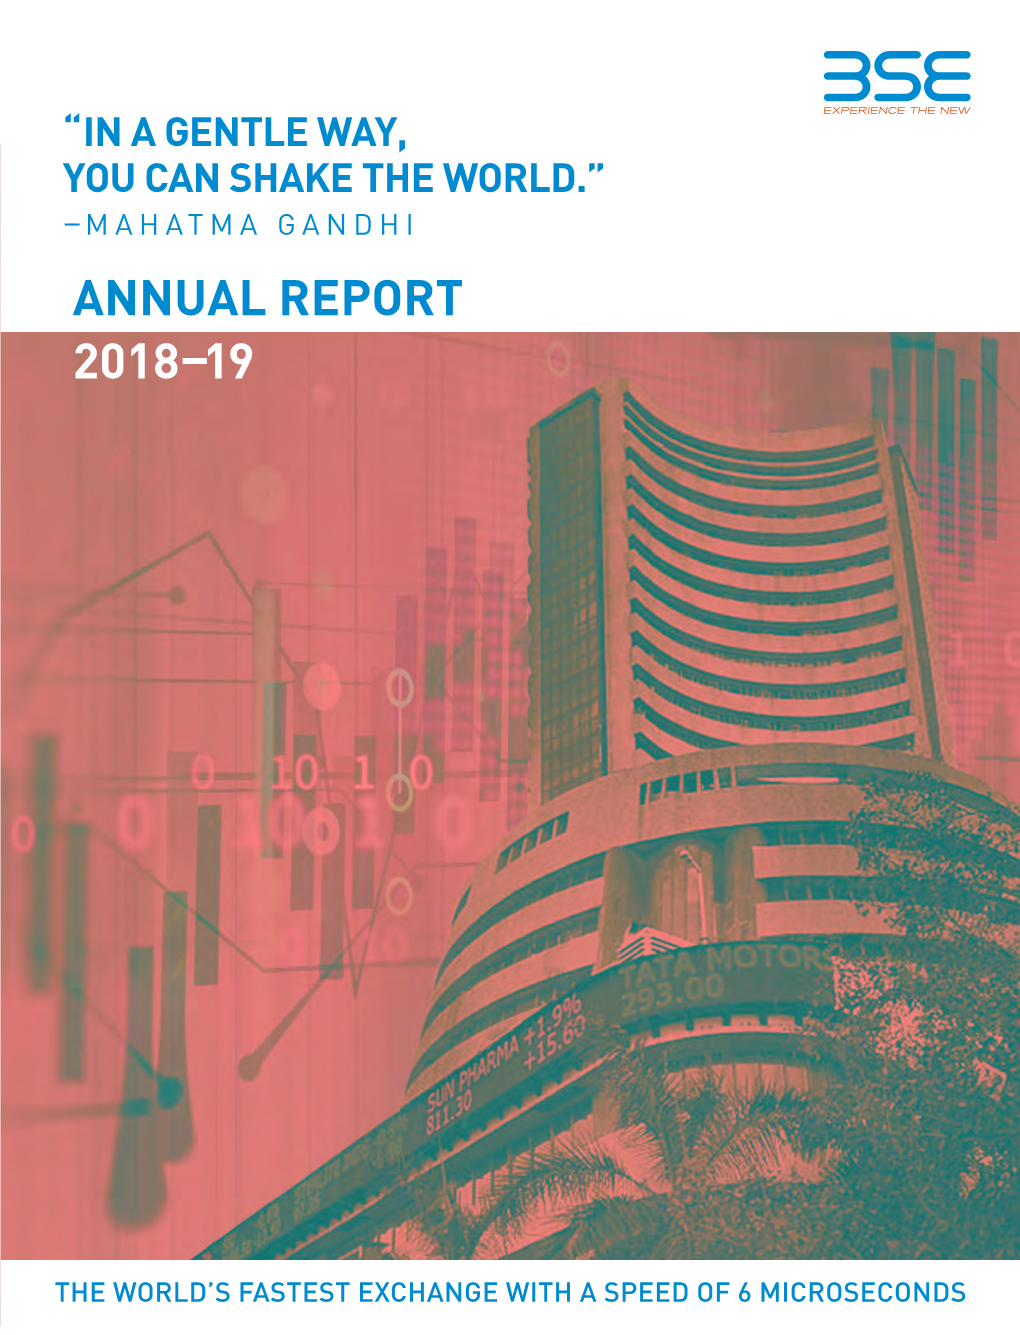 Bse Annual Report 2018-19